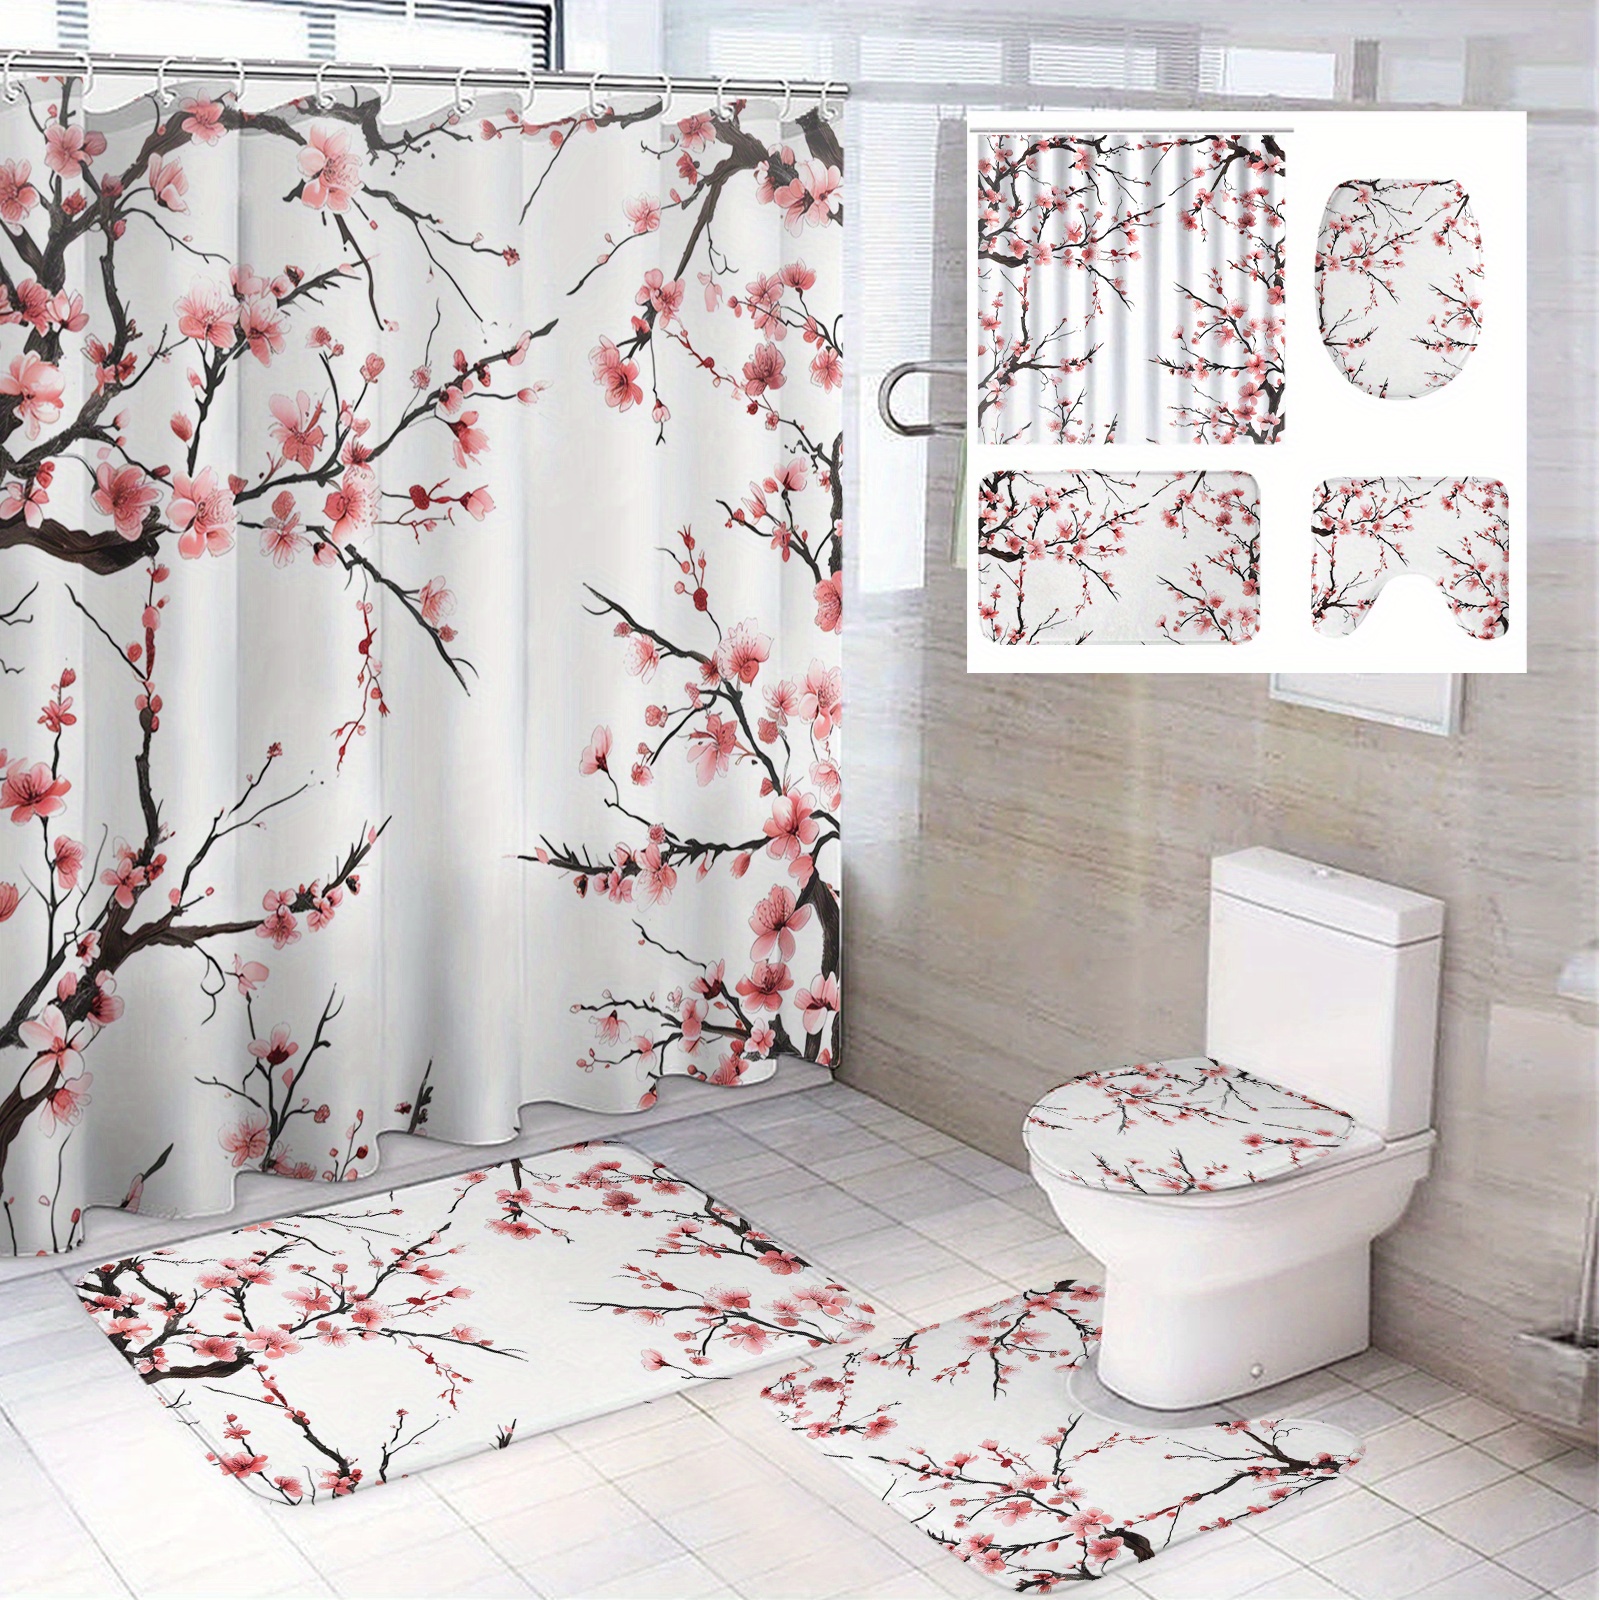 

1/4pcs Cherry Tree In Bloom Pattern Modern Bathroom Decor, Polyester Bathroom Set With 12 Hooks, Bathroom Non-slip Floor Mat, Toilet Seat Cover And U-shaped Mat Home Decor 71*71in